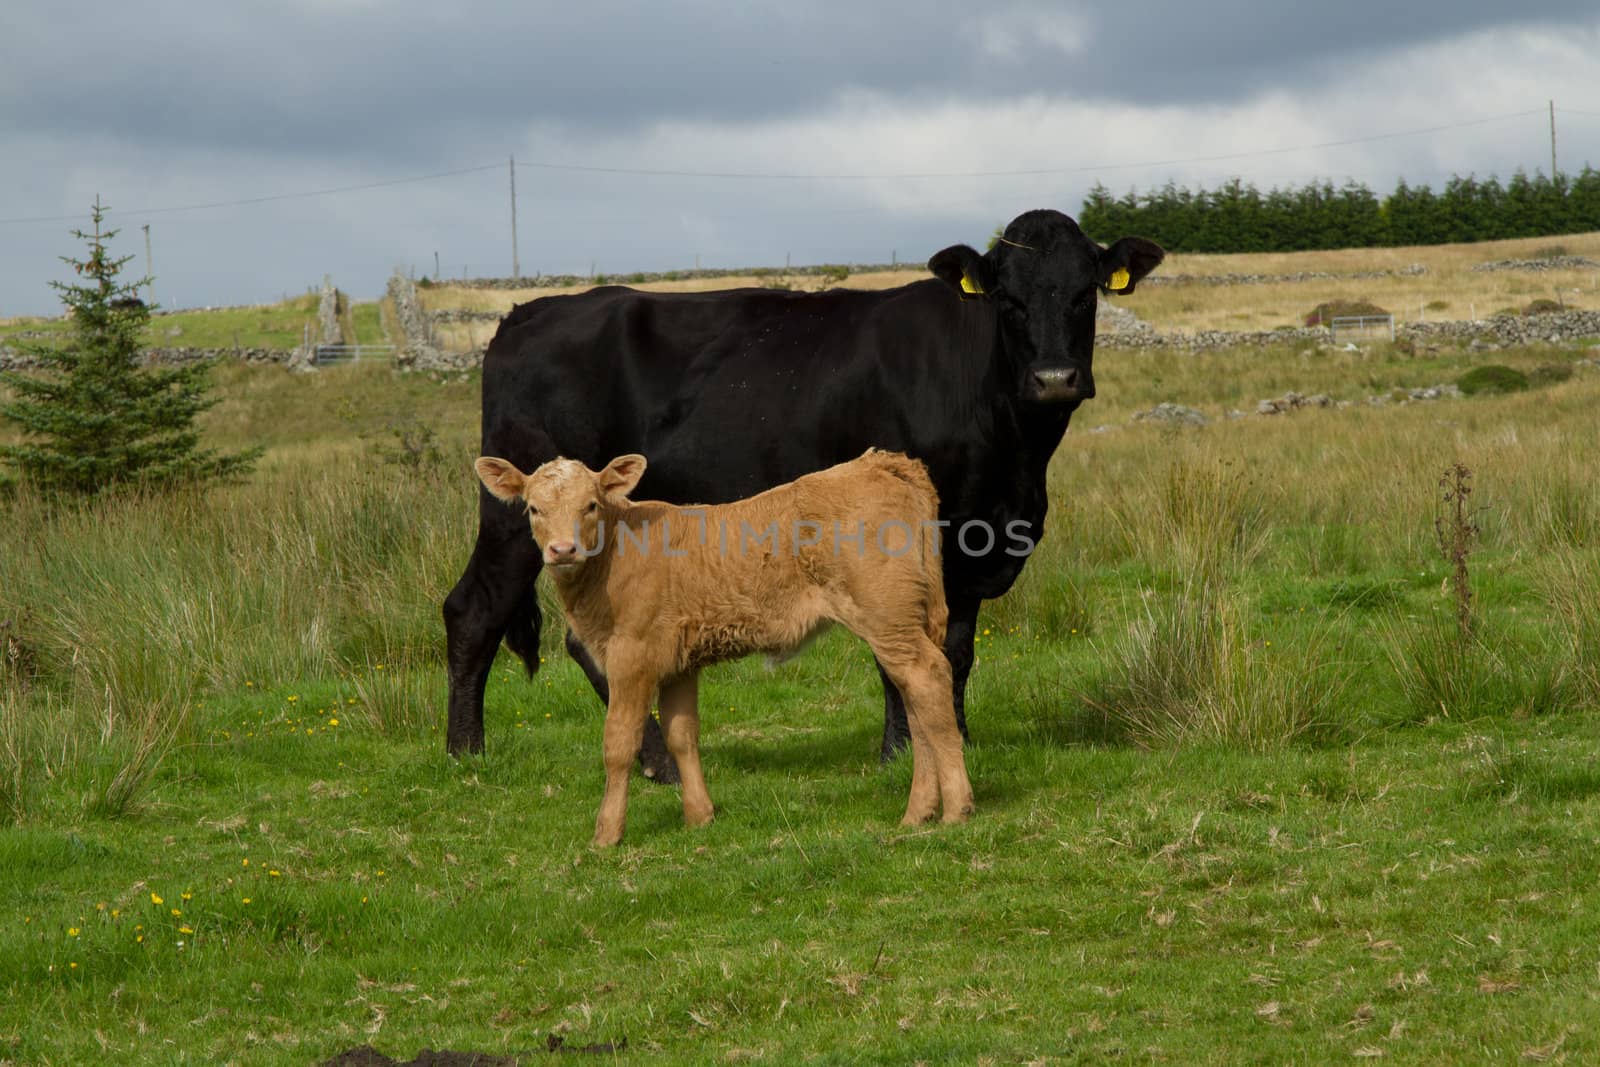 A brown calf stands looking infront of a black cow on a patch of green grass on moorland.